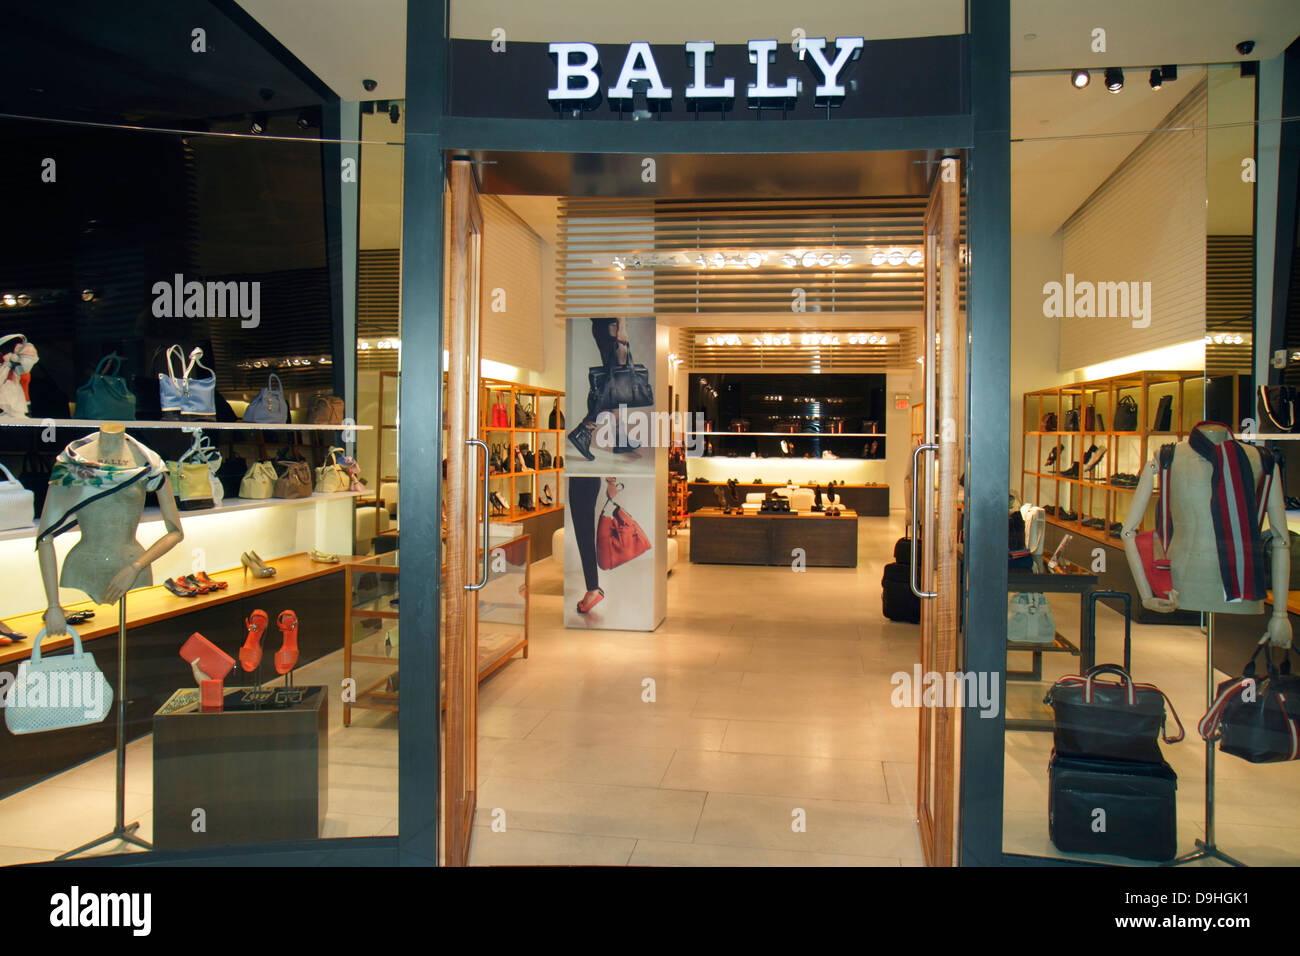 Bally Shop High Resolution Stock Photography and Images - Alamy